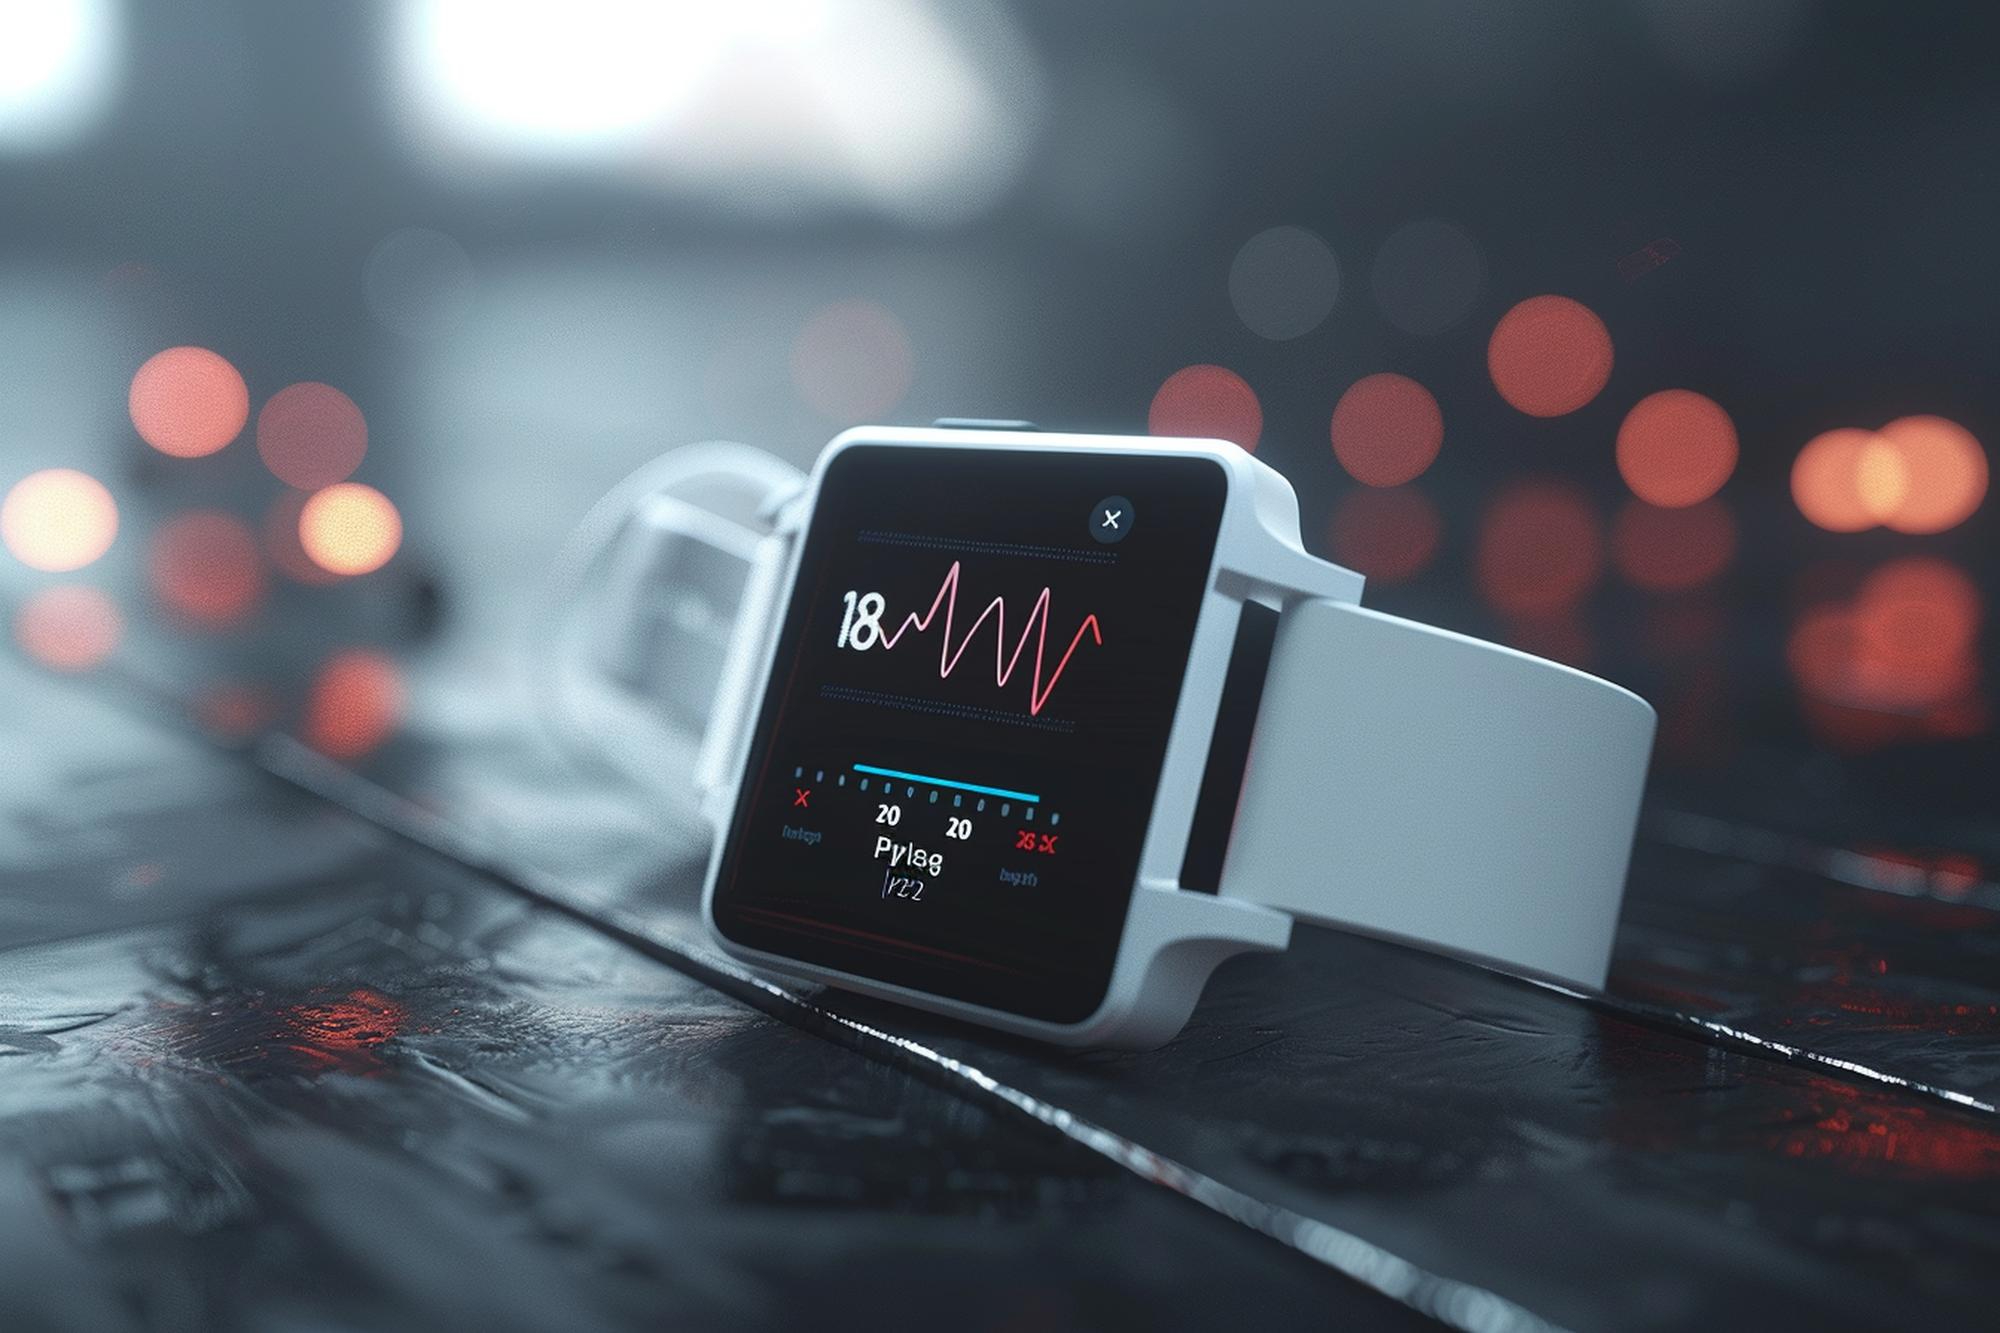 iiit-allahabad-student-develops-a-smartwatch-with-95-diagnosis-accuracy-claim